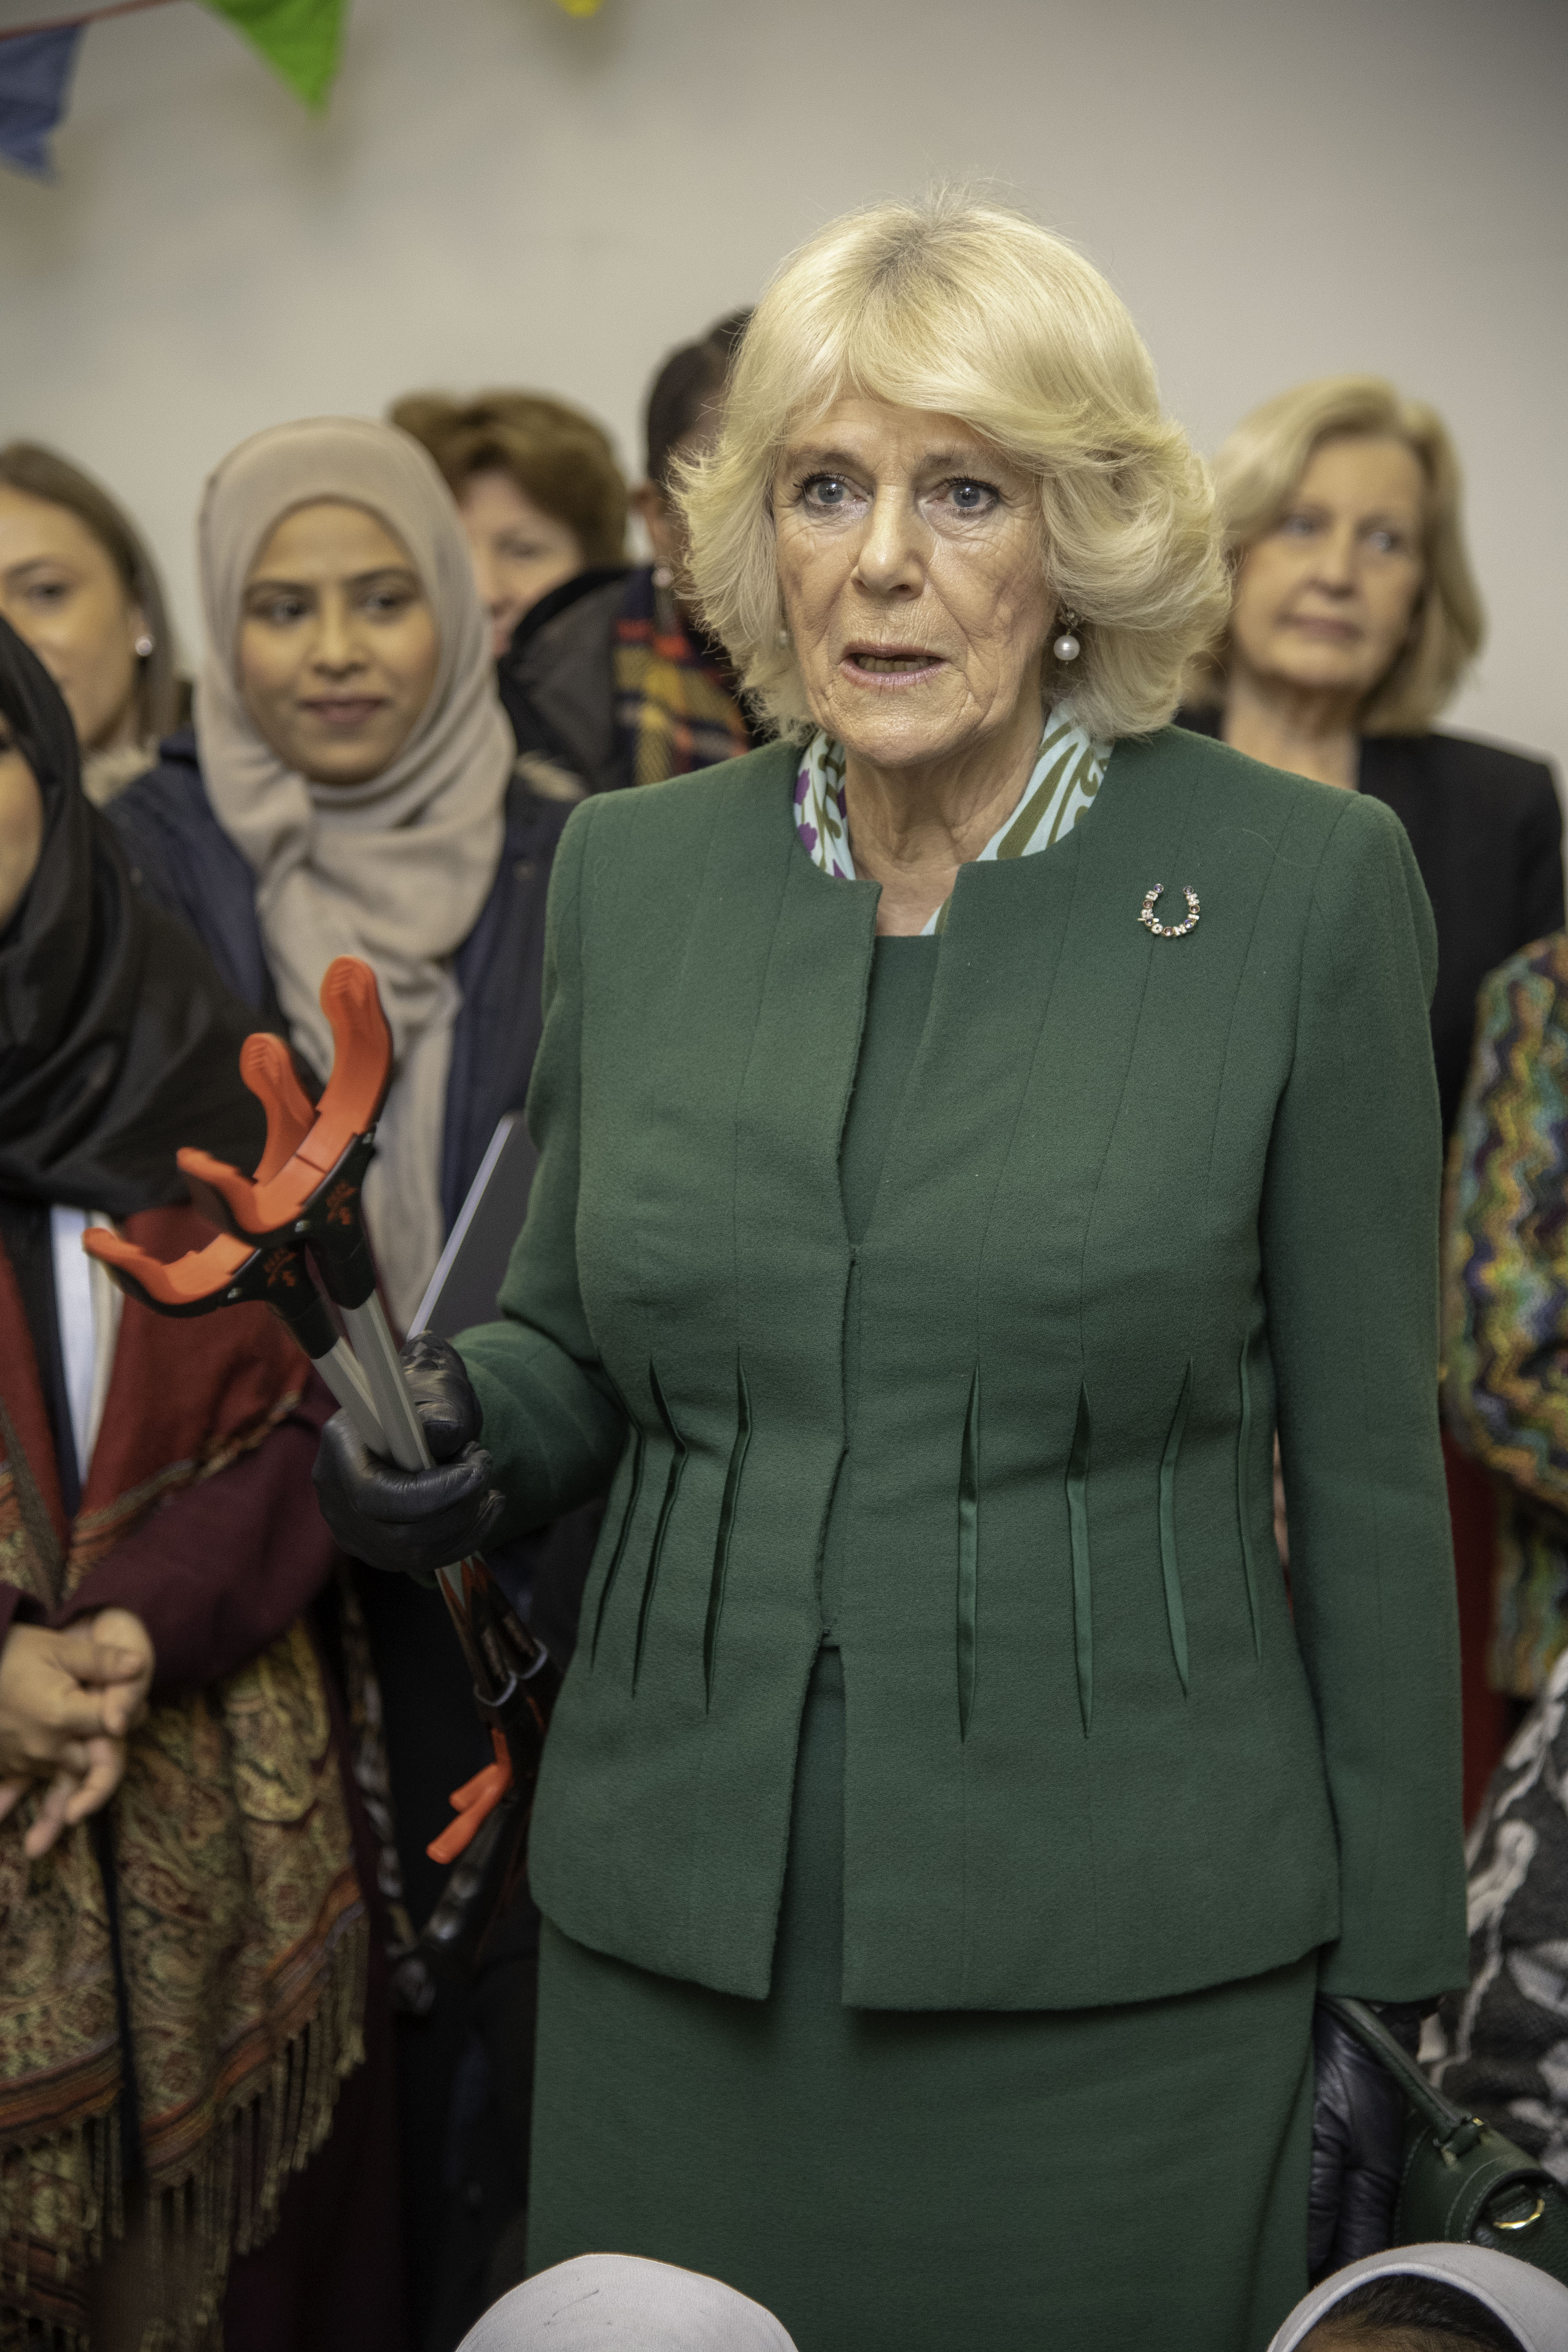 Queen Camilla during her visit to East London, England on January 23, 2019 | Source: Getty Images